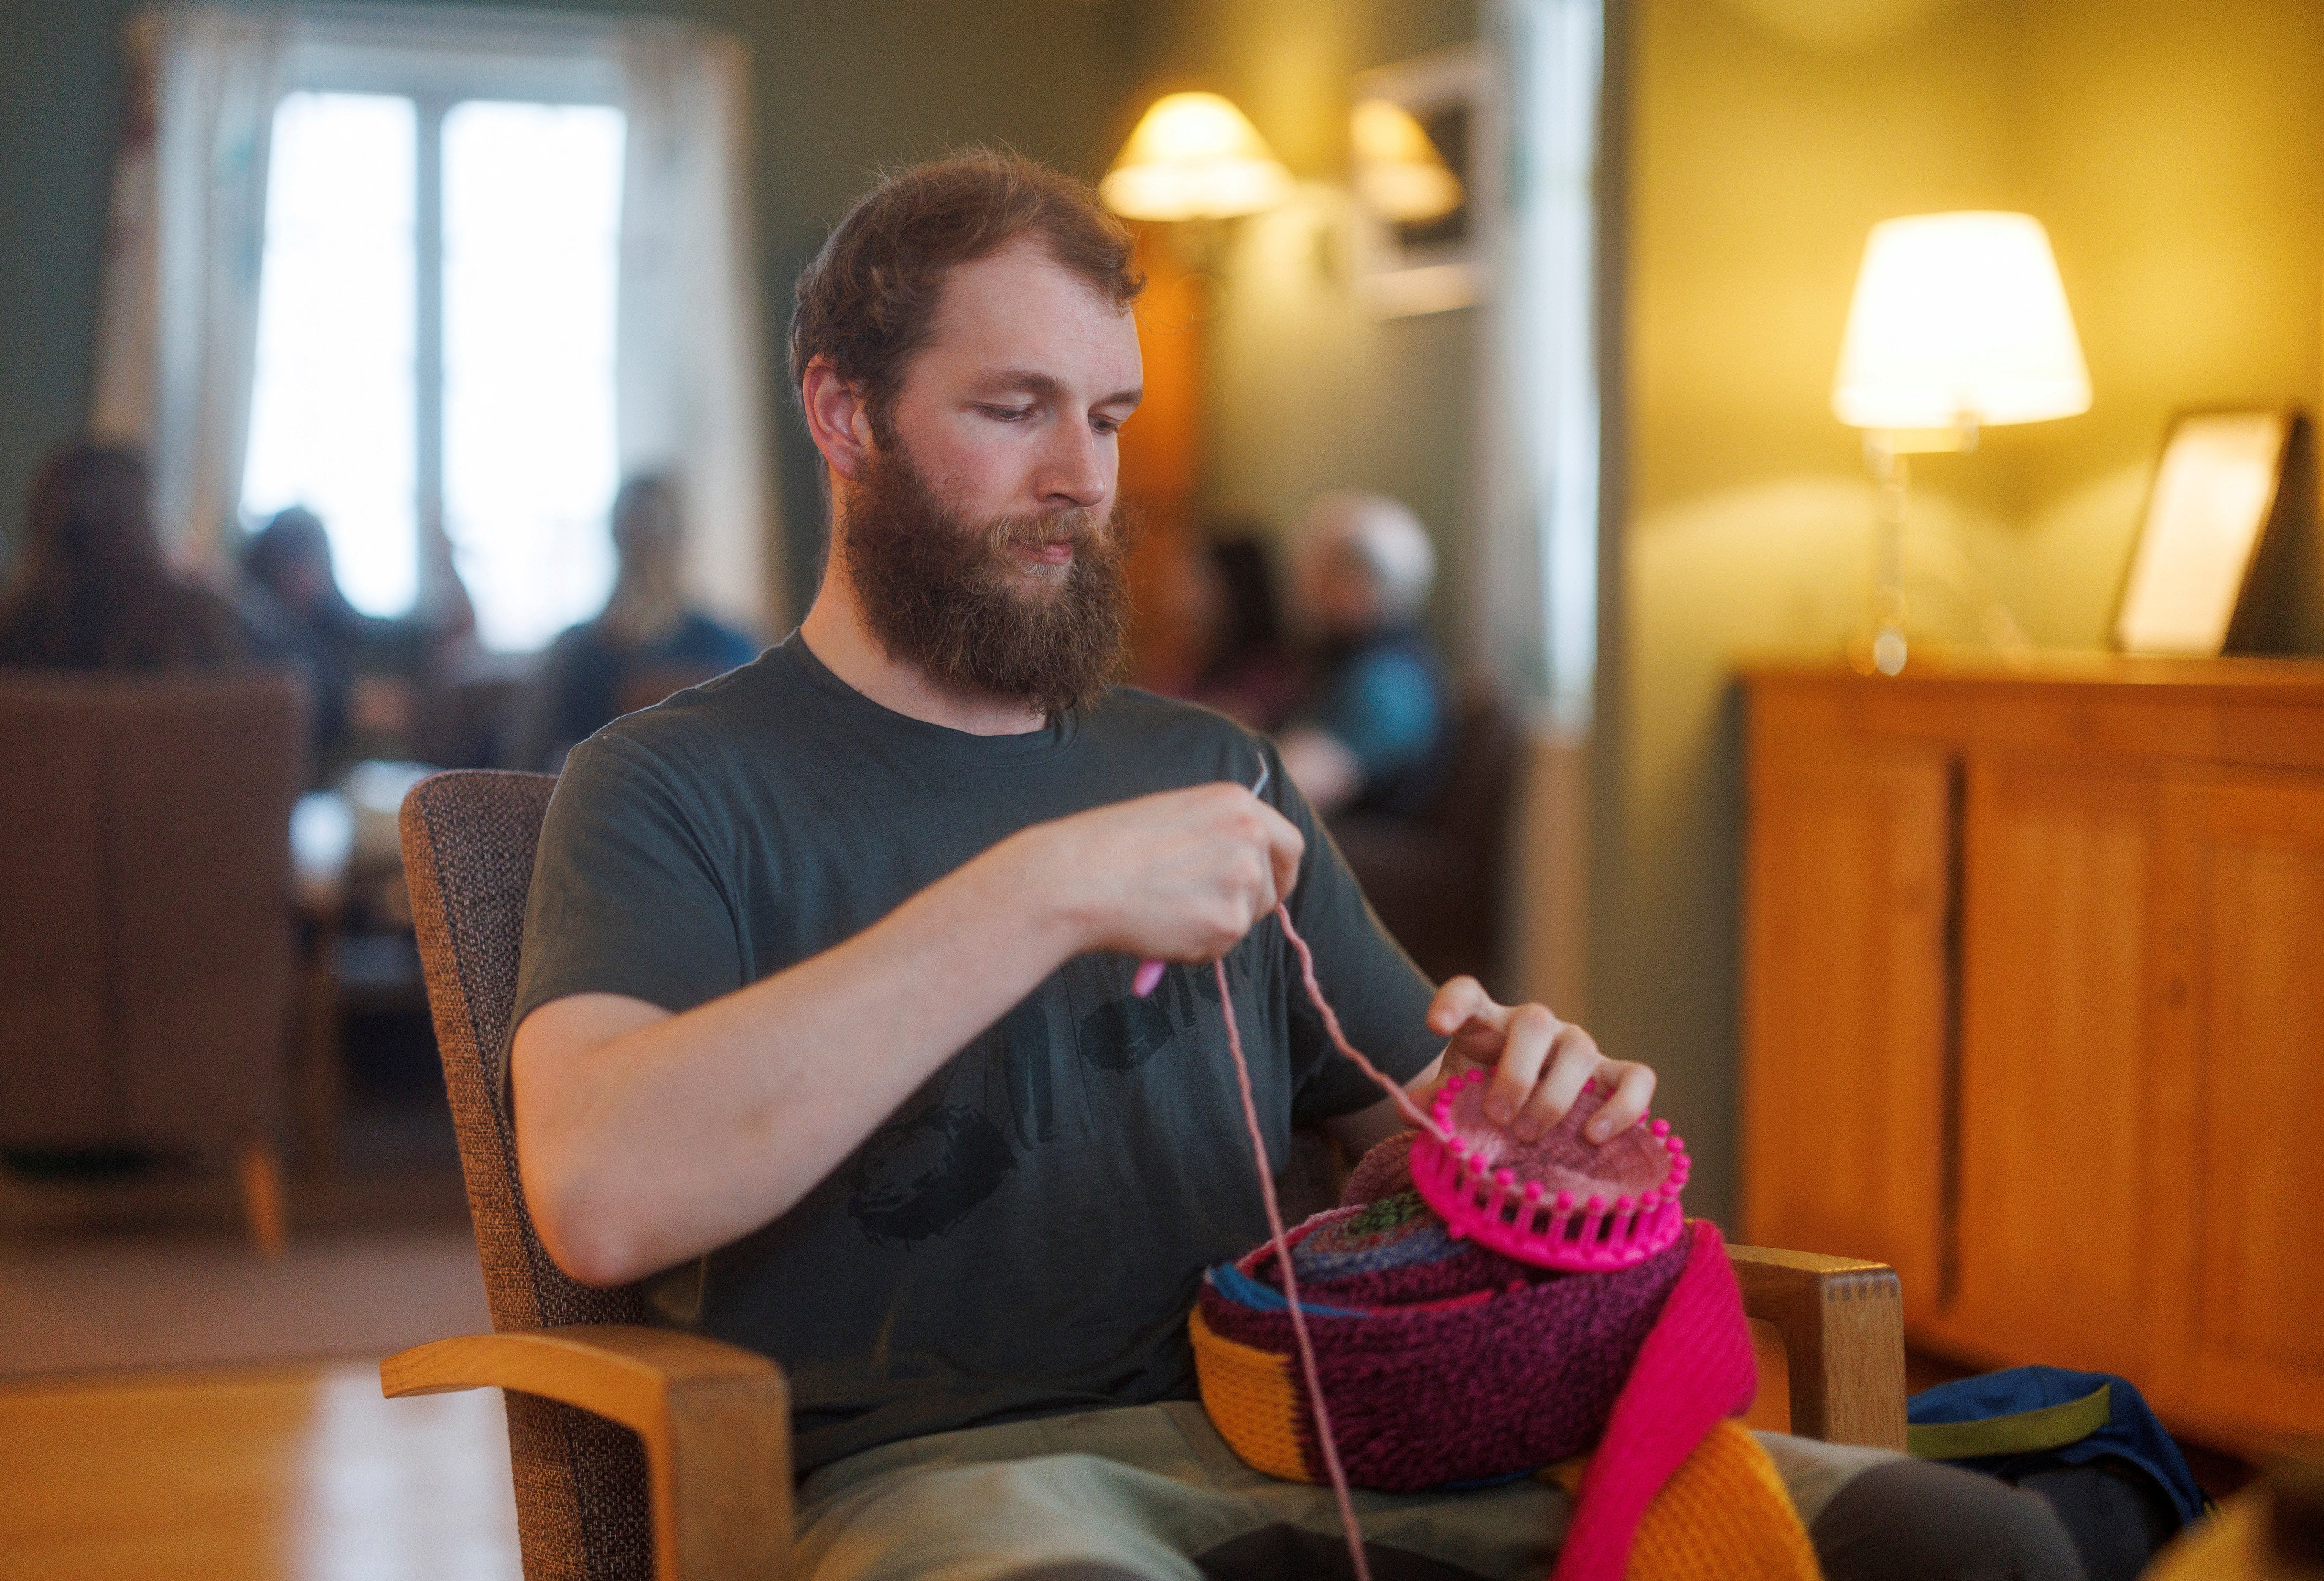 Kings Bay AS chef Espen Ulvenes attends the weekly Knit and Sip get-together in Ny-Alesund